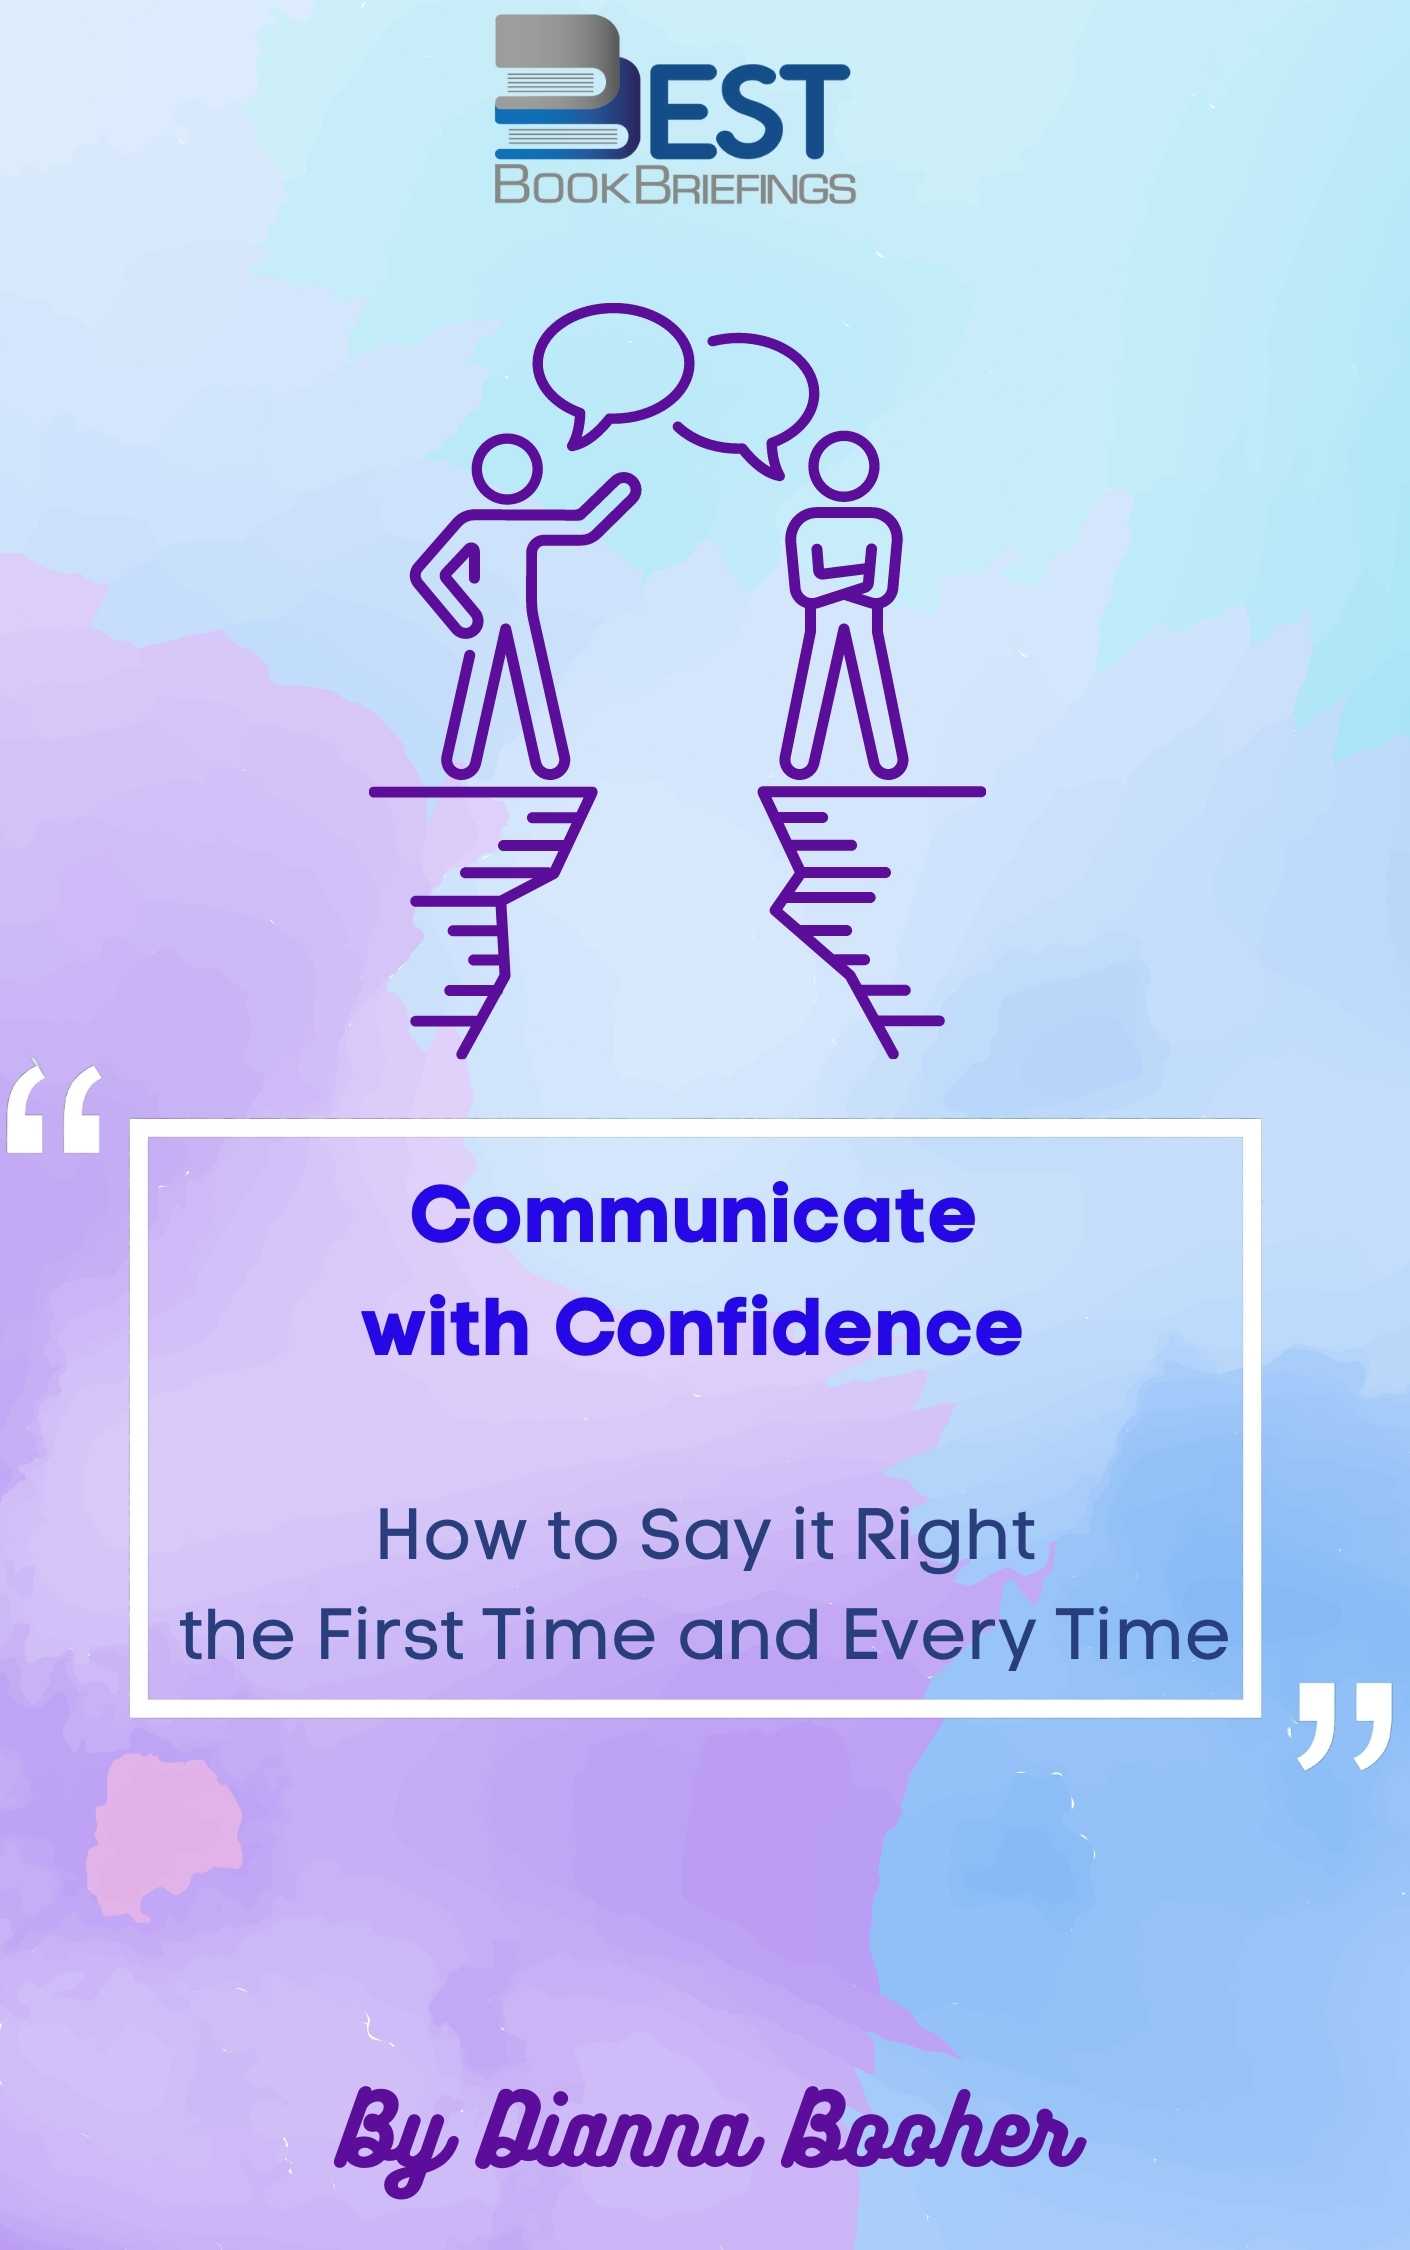 All successful professionals either realize that communication skills can increase their ability to lead more effectively or understand that poor communication habits are limiting their influence and results. Better communication is an essential ongoing process. Failure to communicate is the frustration of modern management. Over time, all relationships depend on the 